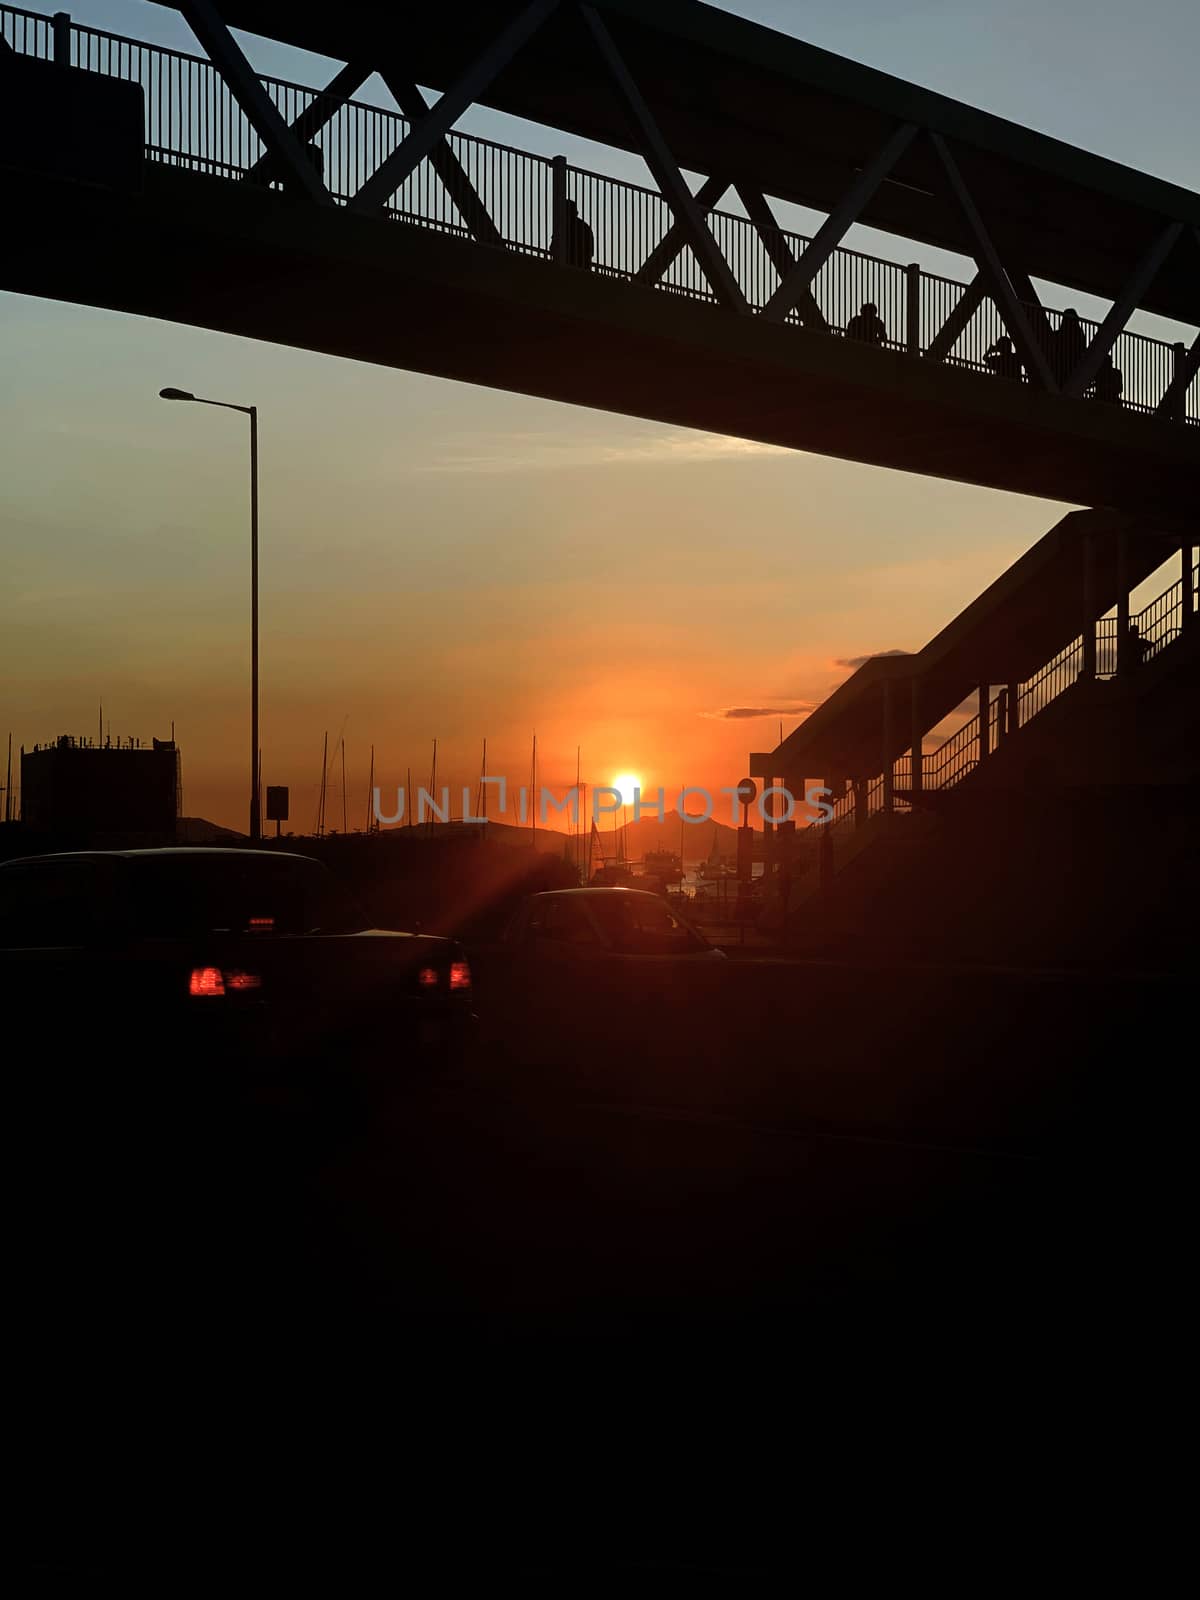 The silhouette of city bridge, road, car in Hong Kong downtown district at sunset